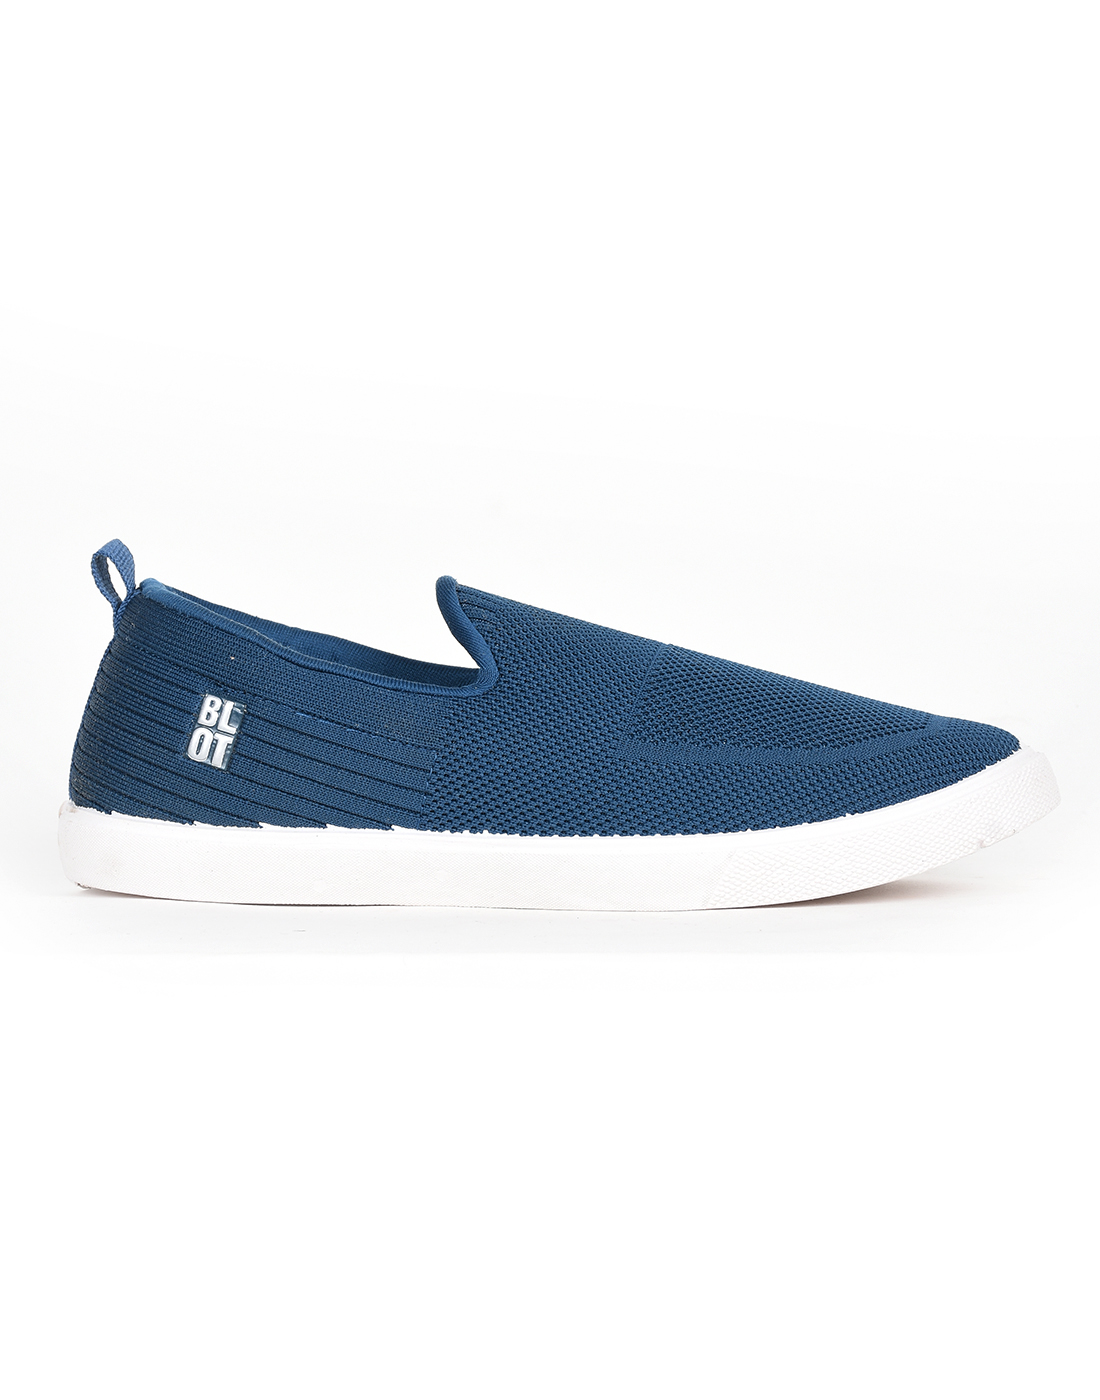 PARAGON Mens Self Design Blue Casual Sneakers | Stylish, Comfortable and lightweight Slip-on Sneakers for Men